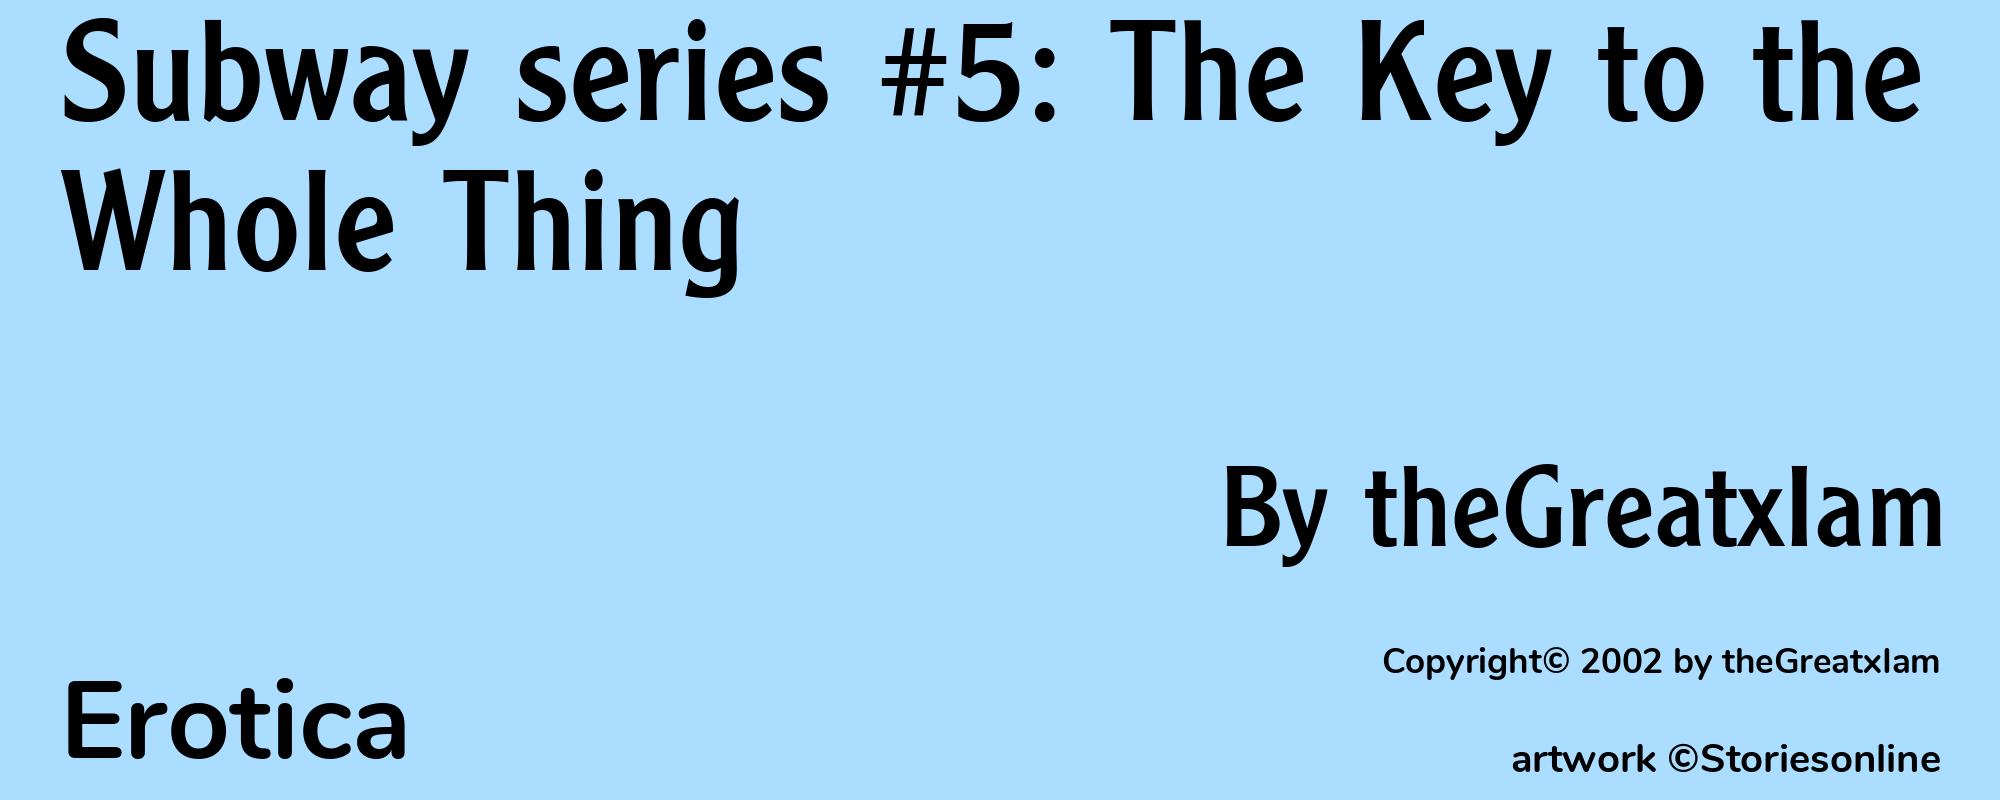 Subway series #5: The Key to the Whole Thing - Cover